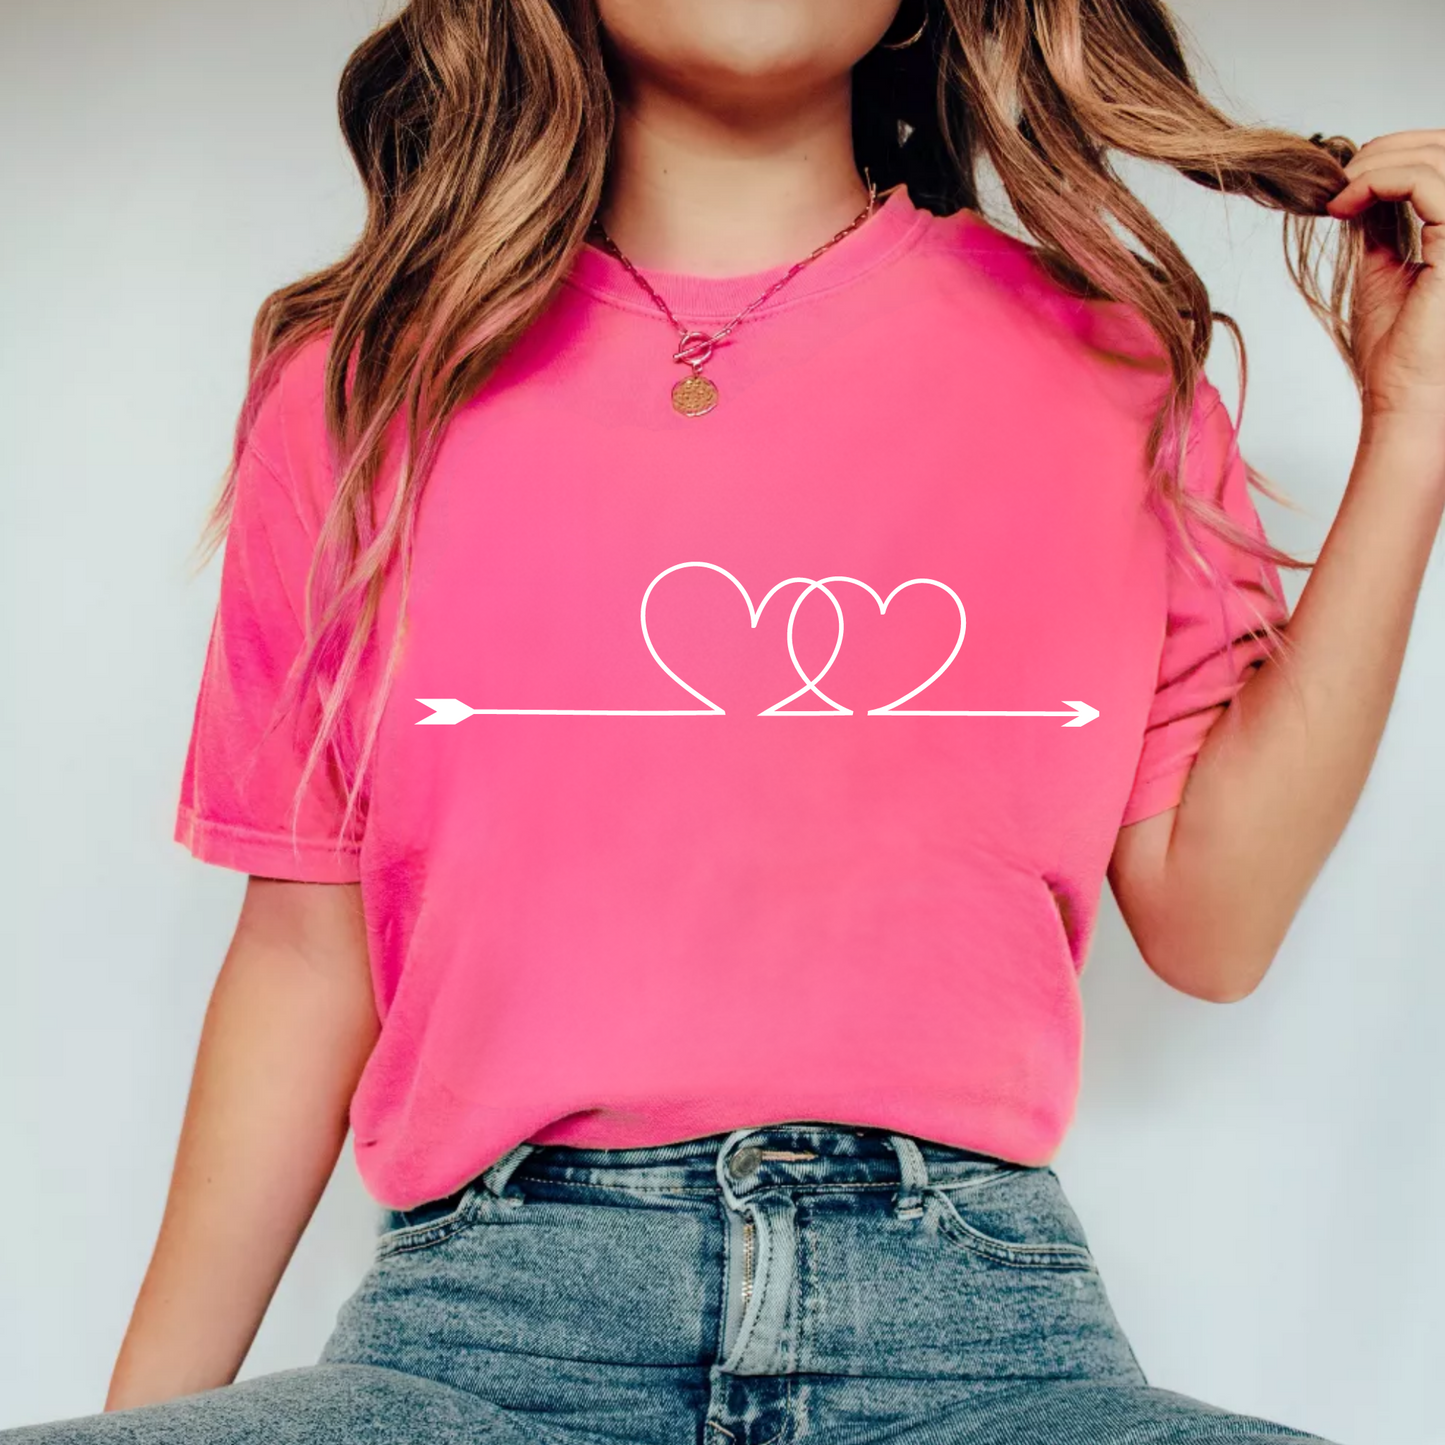 (Shirt not included) Double Heart Arrow-  Matte Clear Film Transfer